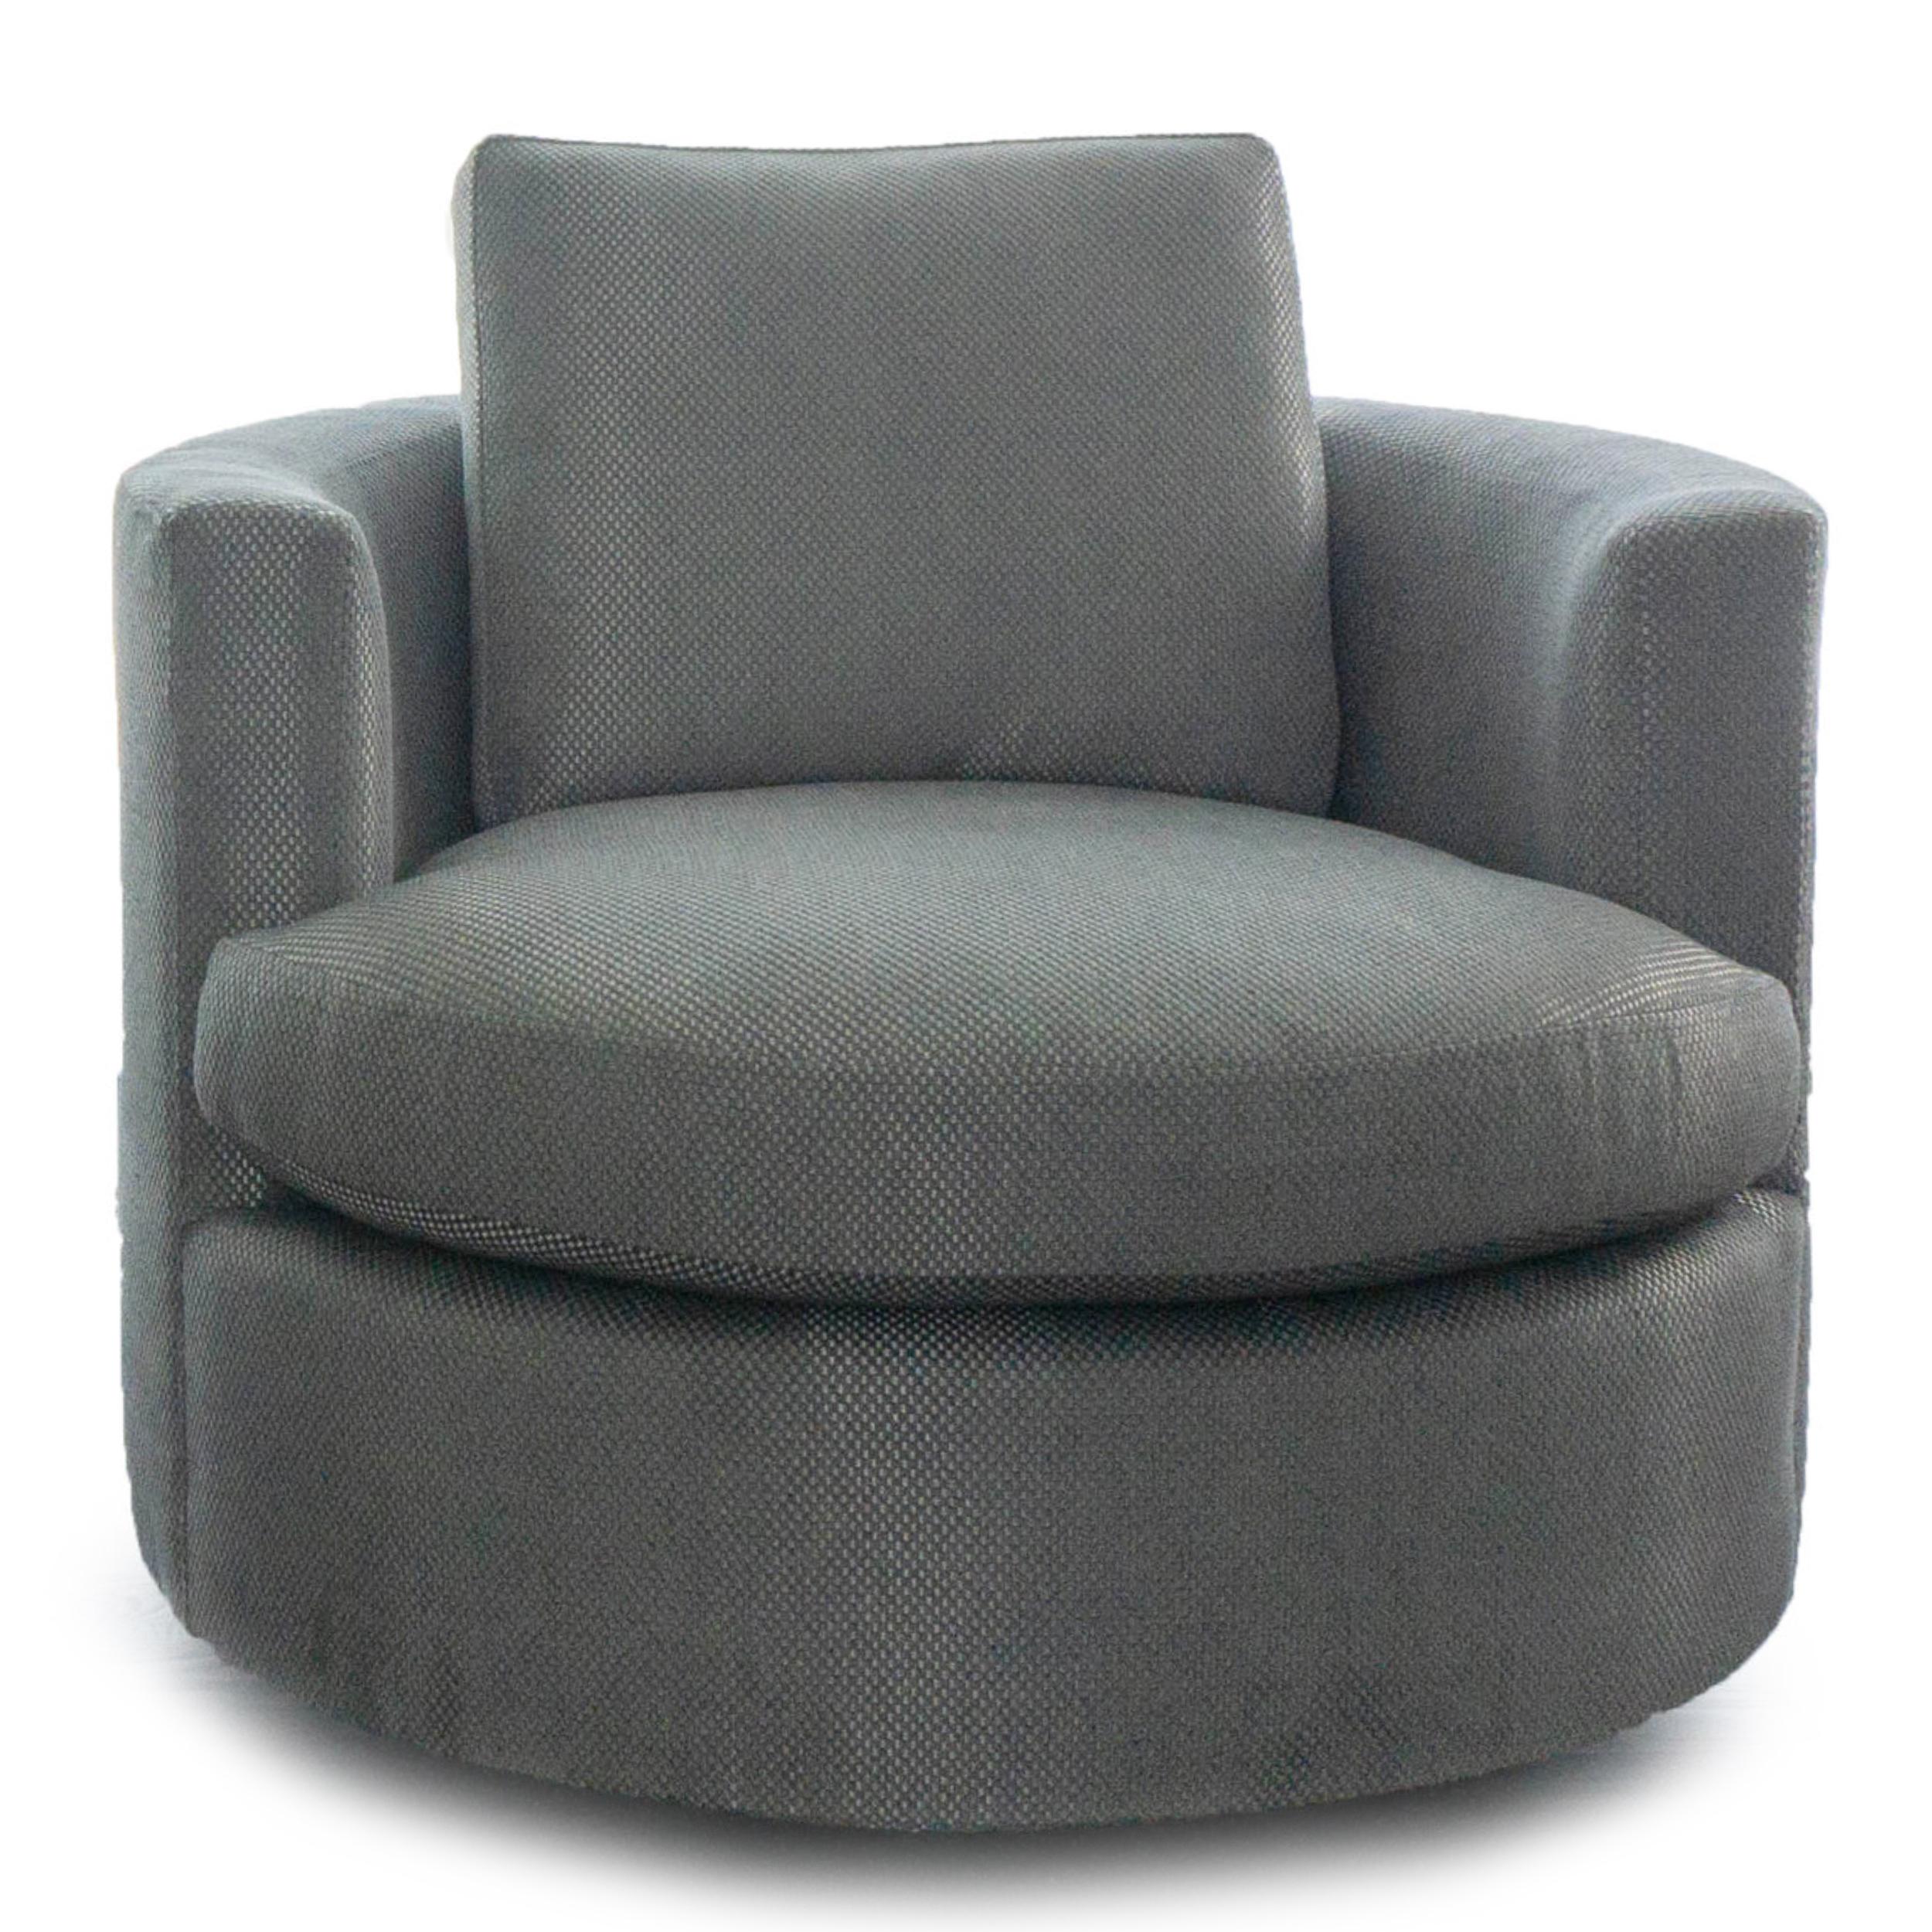 This modern swivel chair is built to order and completely customizable. Able to rotate 360 degrees and features one loose back and seat cushion.

Measurements:
Overall: 37” W x 37” D x 32” H
Inside: 20” D x 14” H
Seat Height: 18